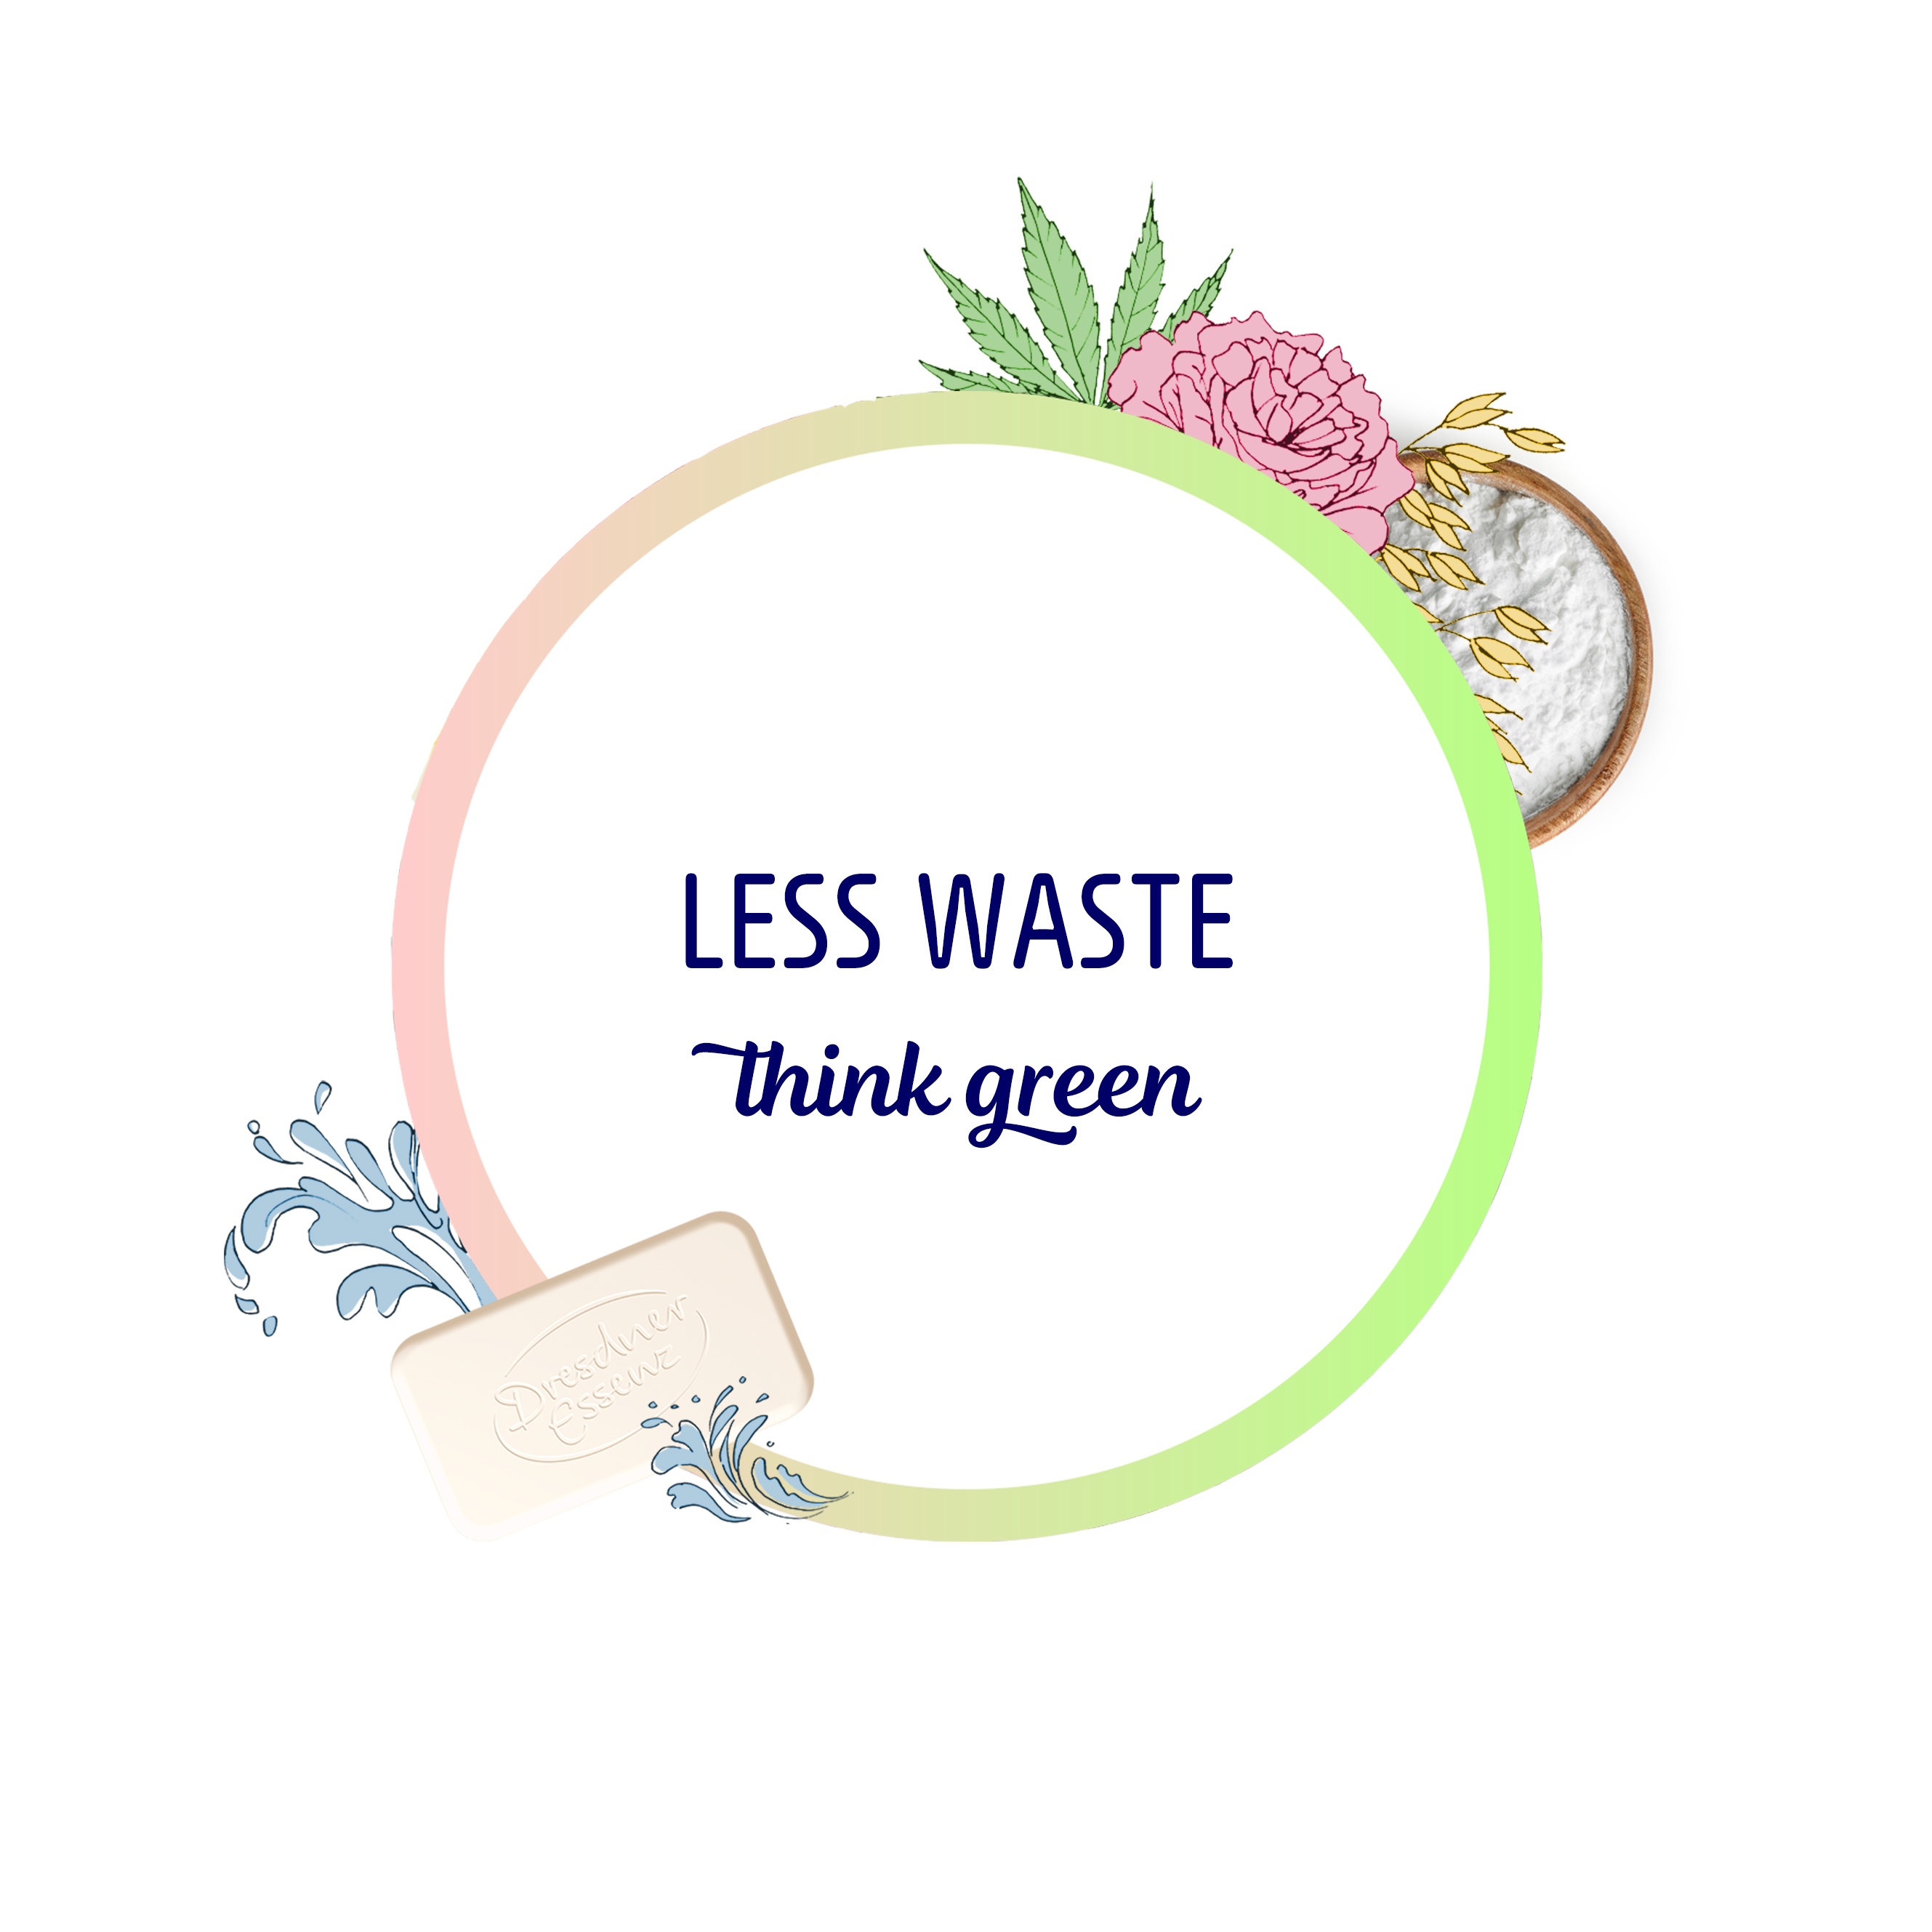 LESS WASTE